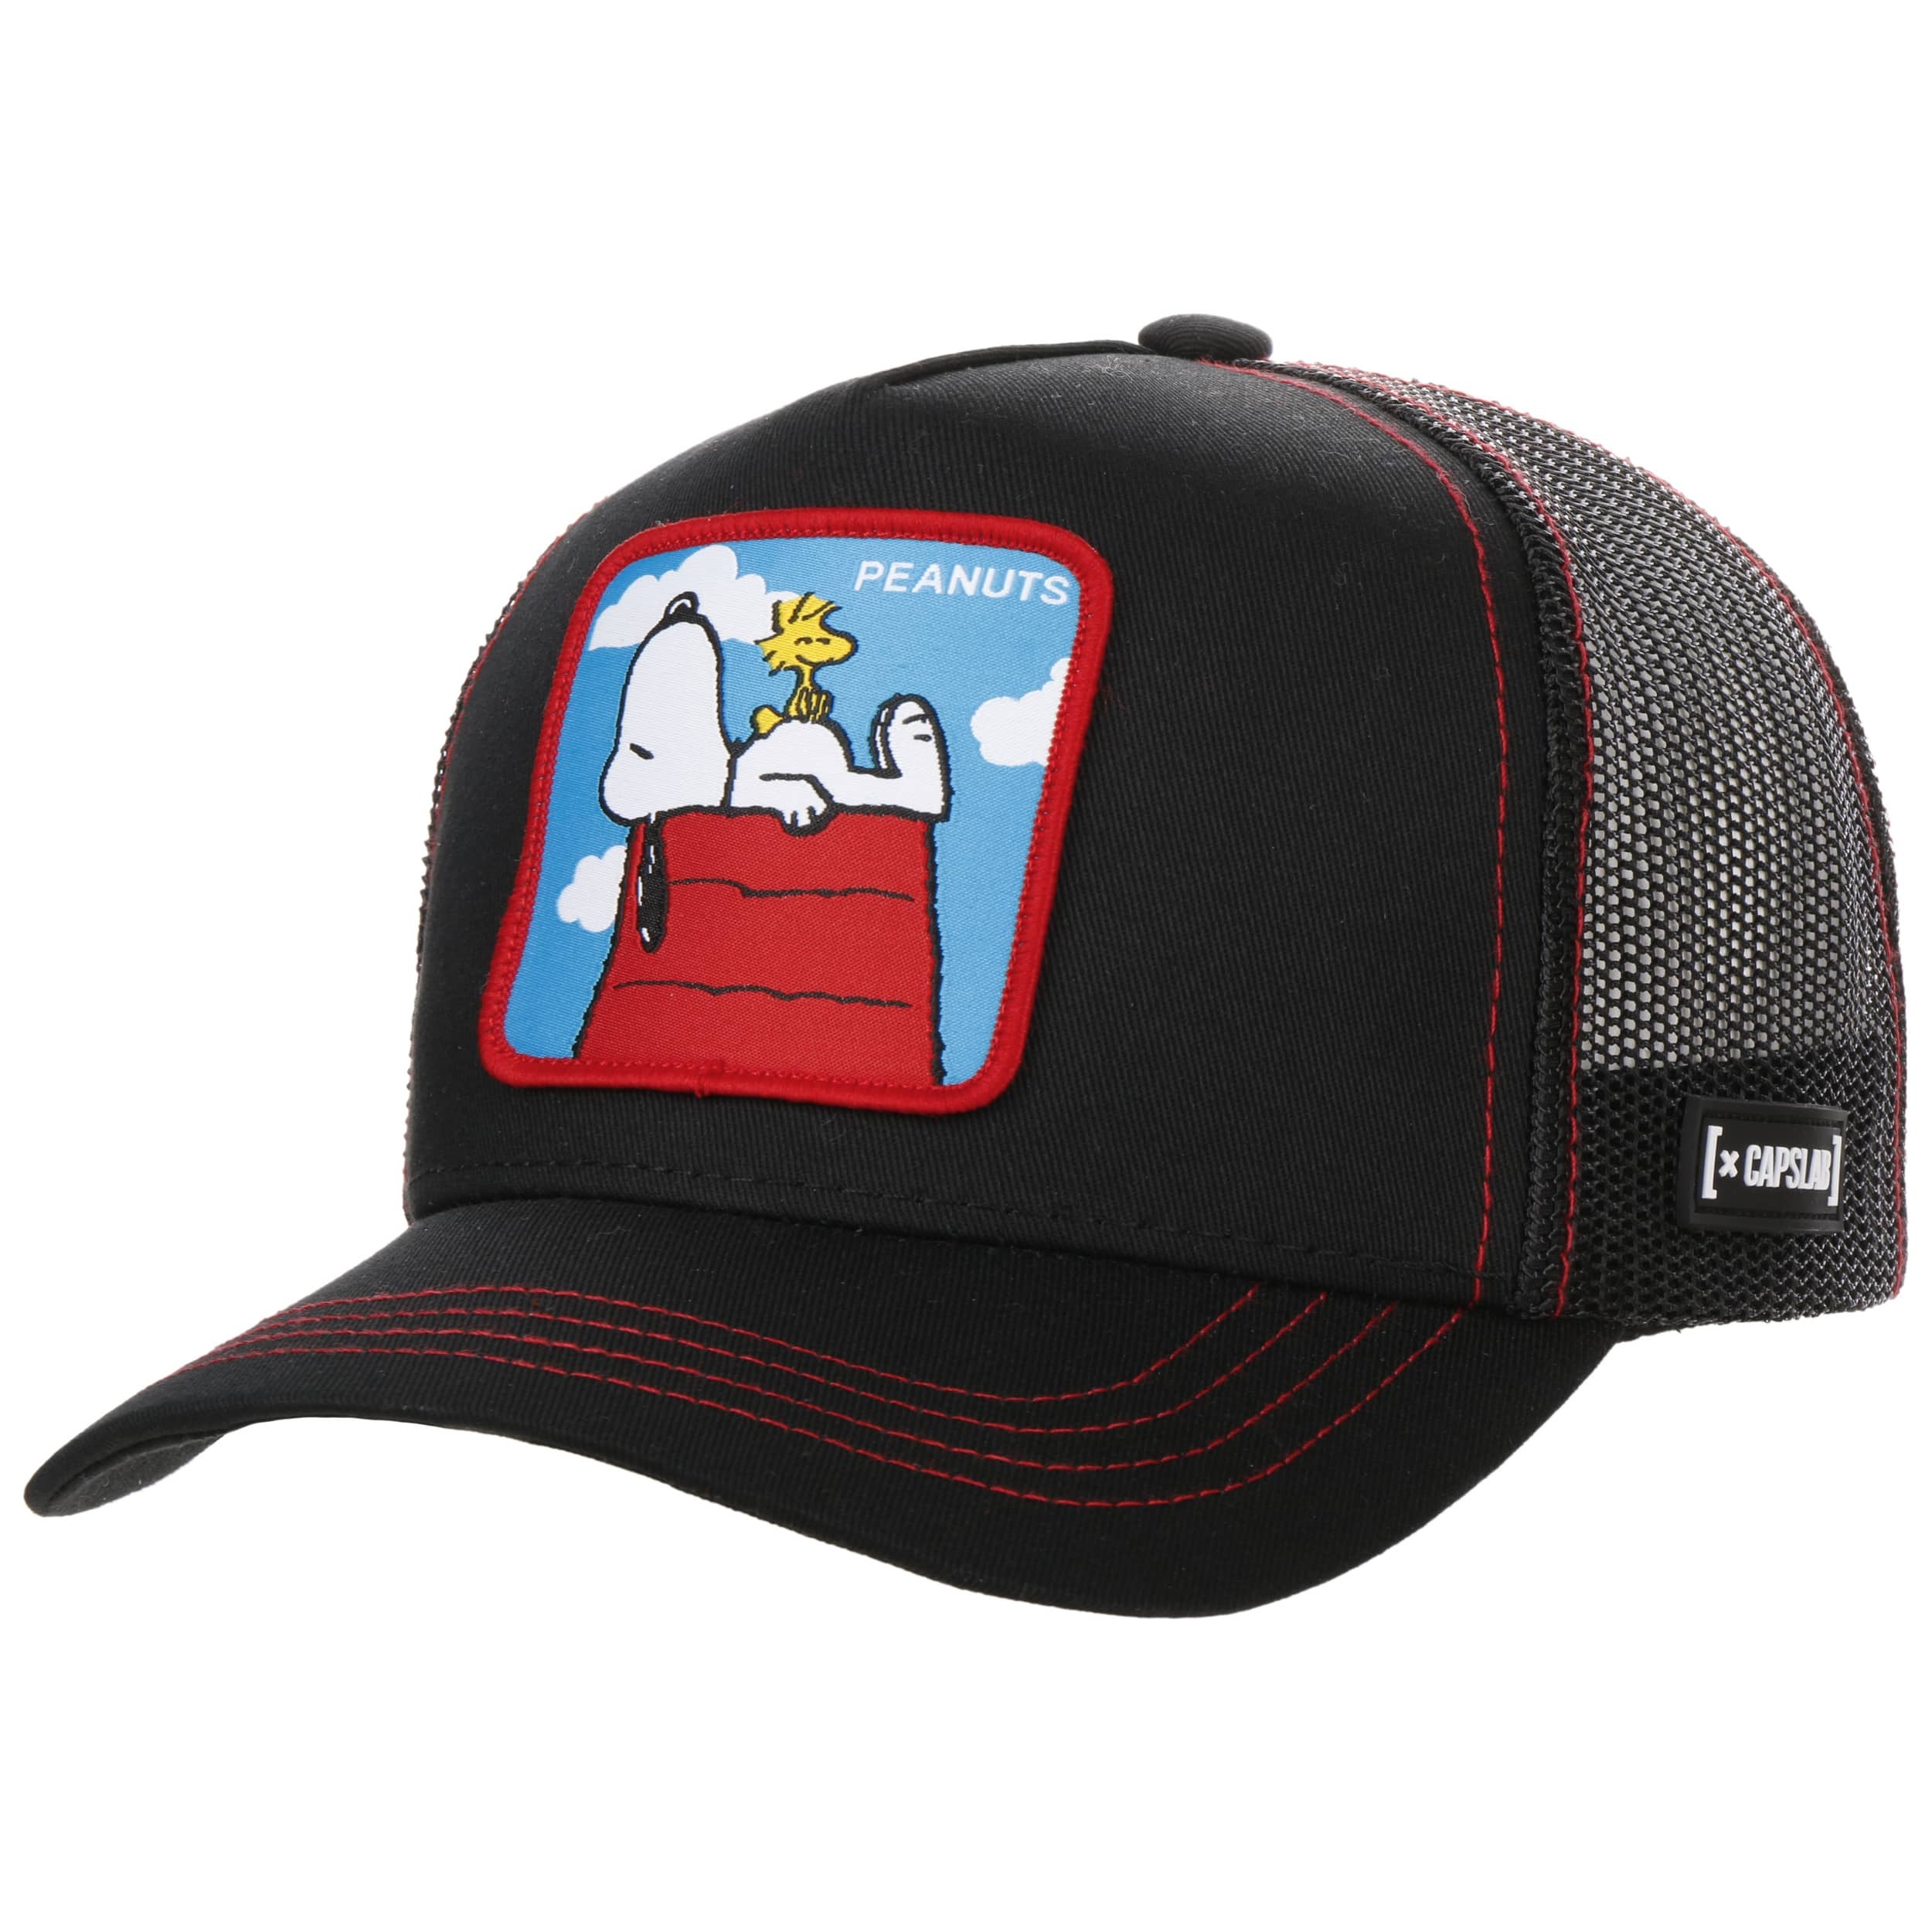 Peanuts Snoopy Cap by Capslab